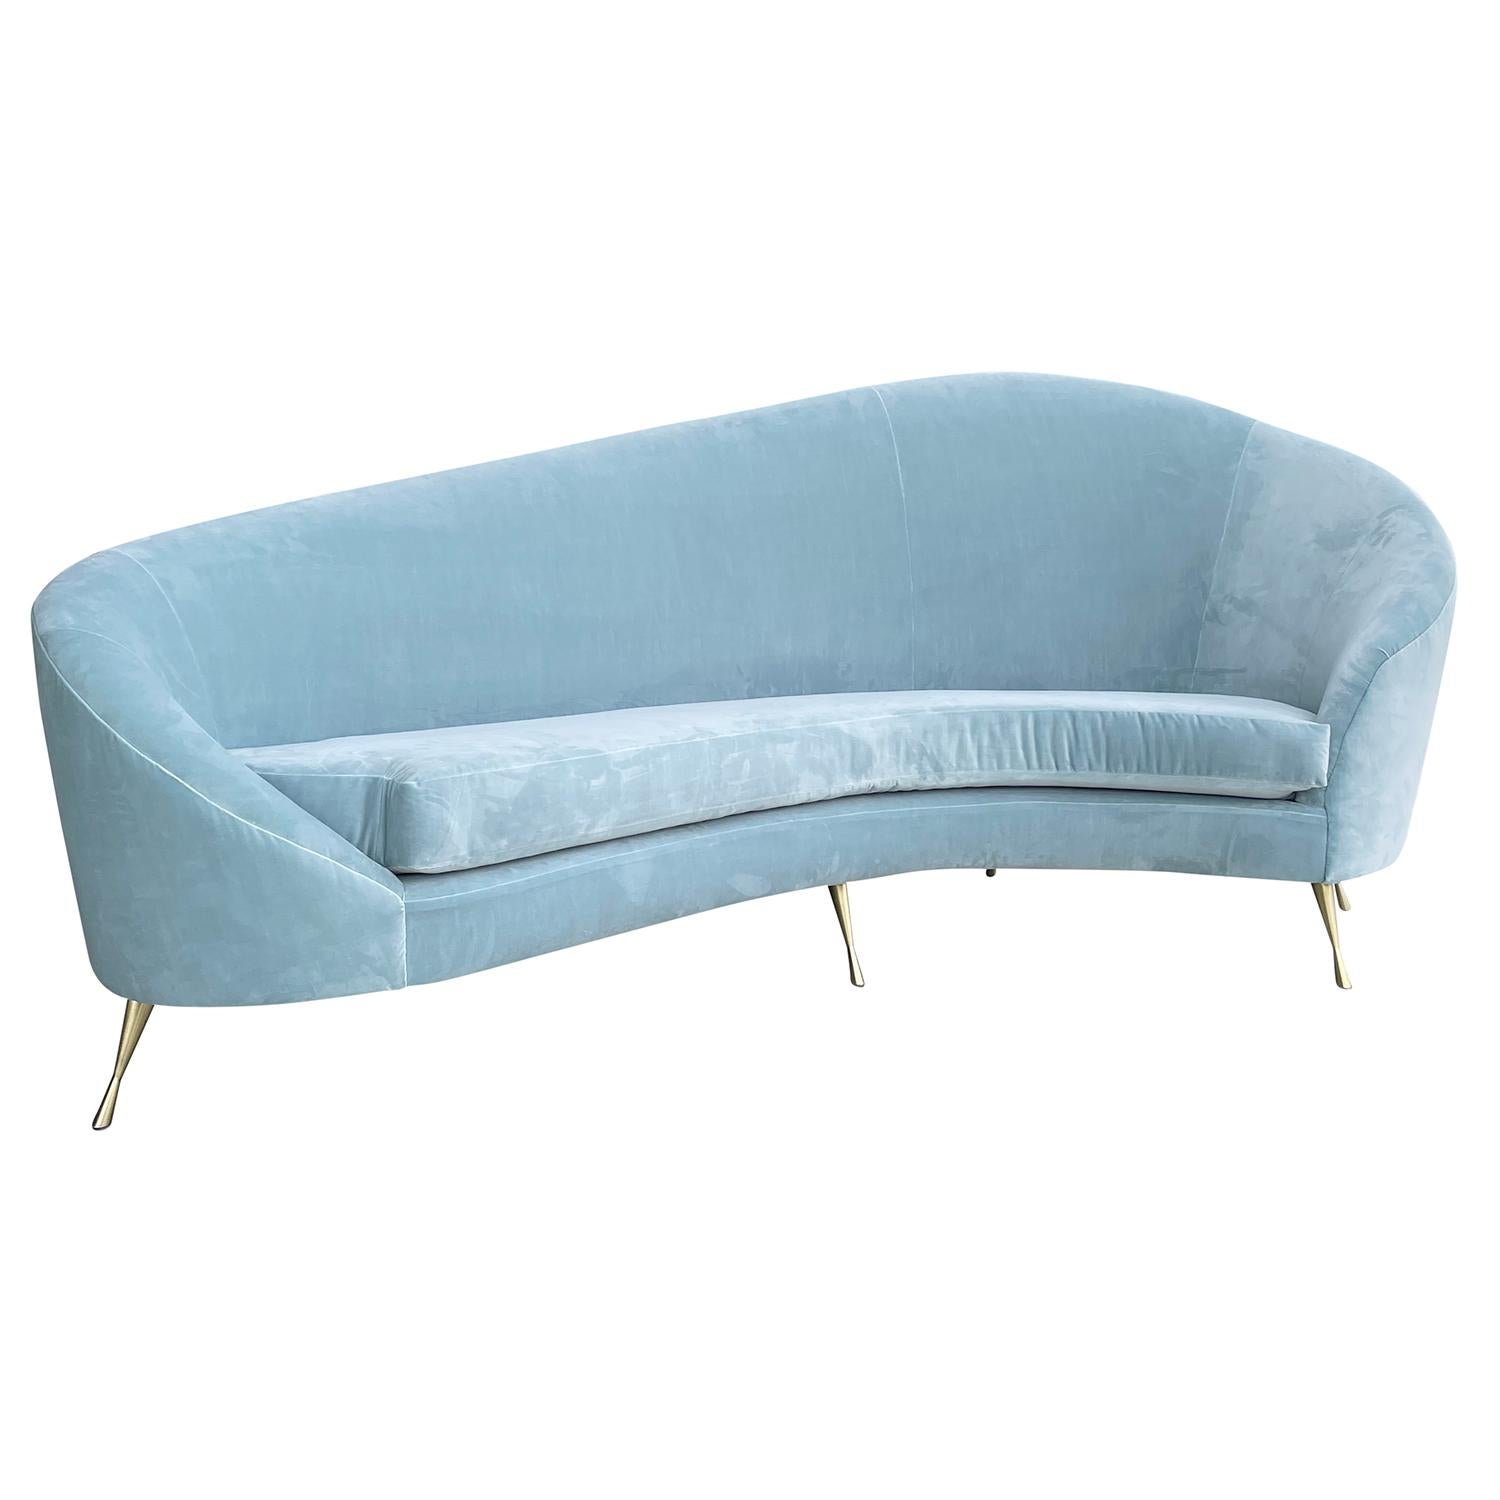 A large, half rounded vintage Mid-Century Modern Italian upholstered three four sofa, canapé designed by Federico Munari in good condition. The seat backrest of the divano is slightly curved with gently outstretched arms, standing on six curved